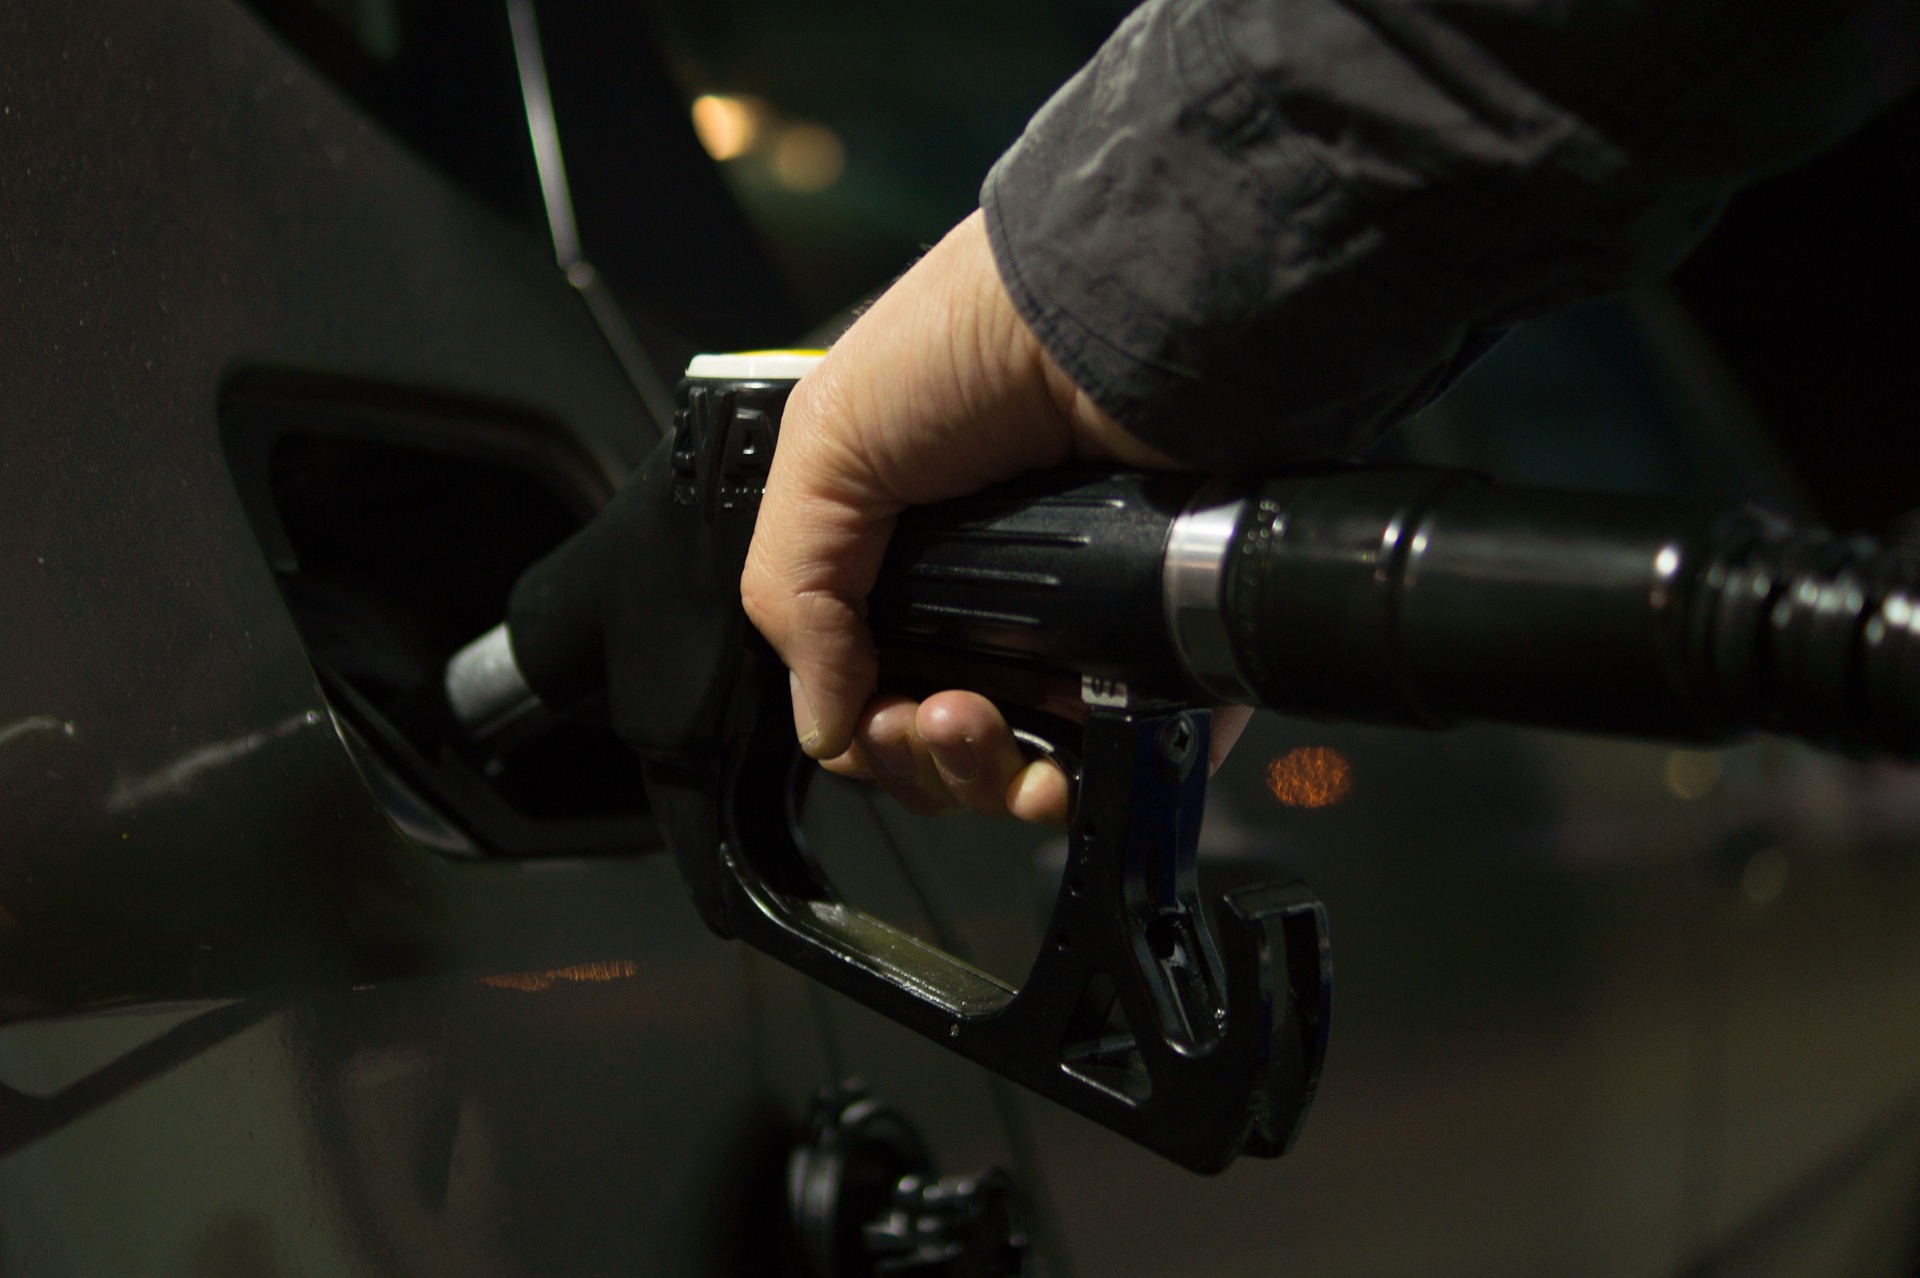 Ukraine war urging Mini to stop fuel production and fuel prices increase